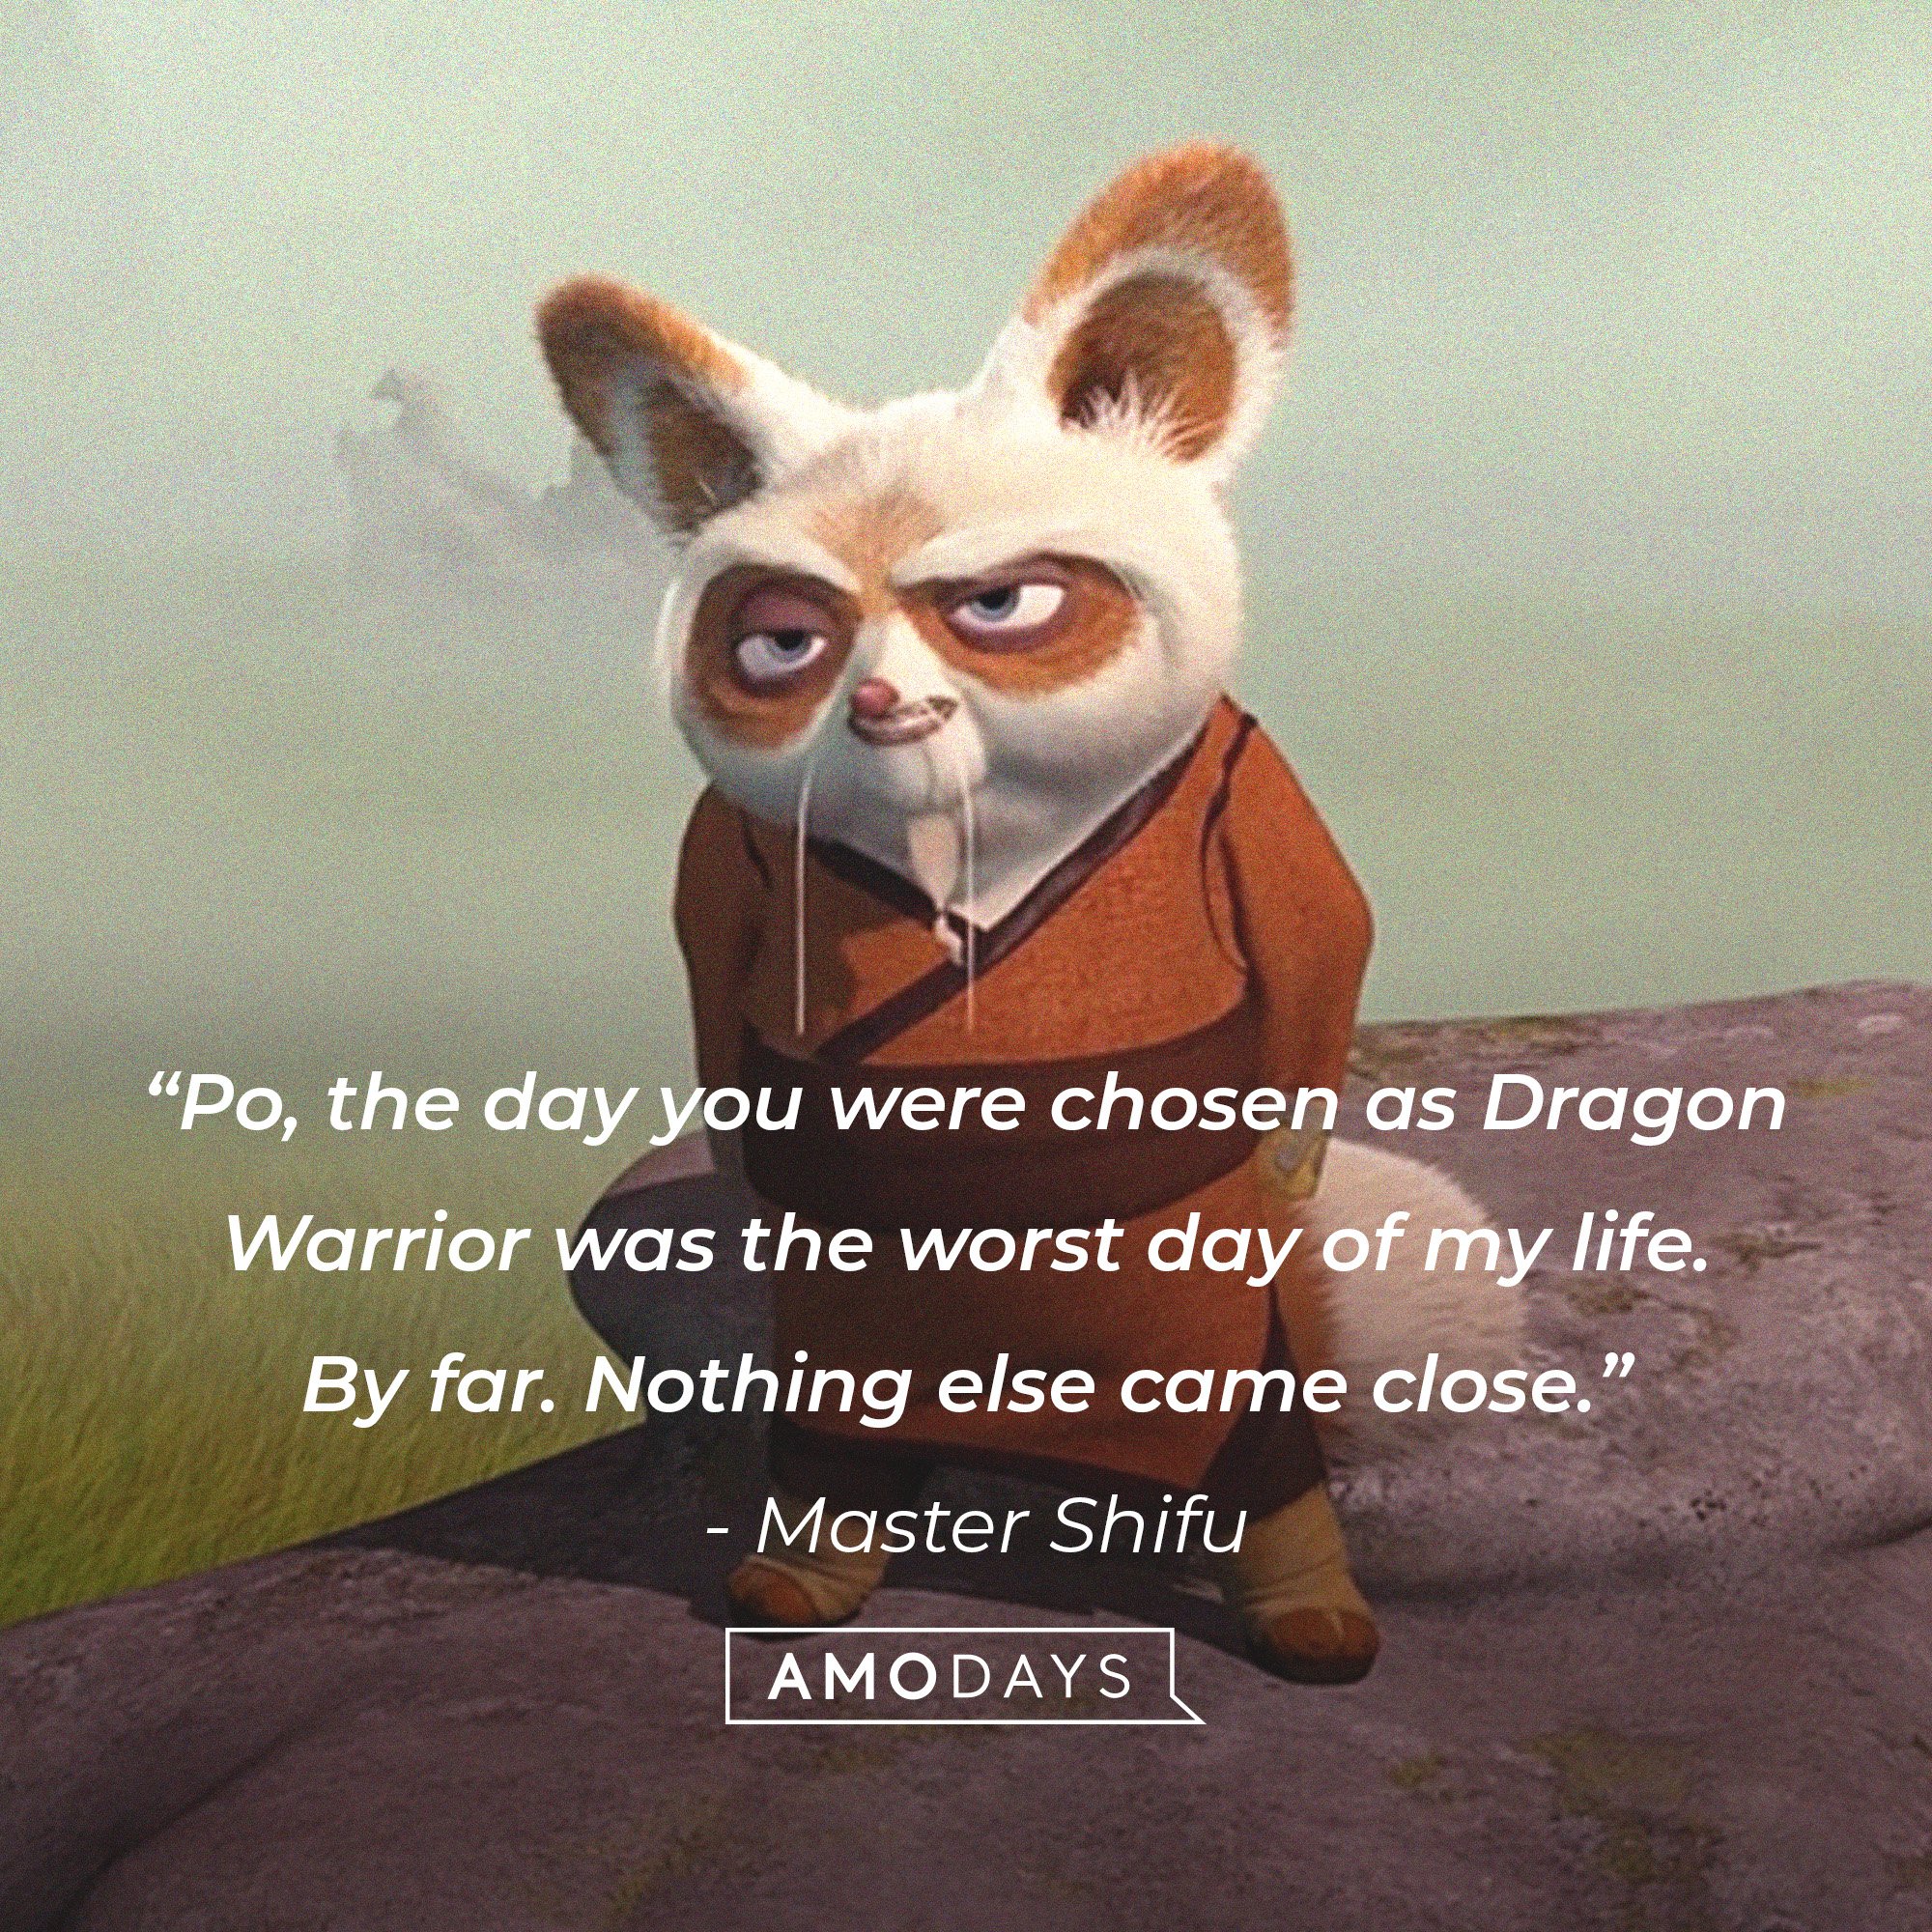  Master Shifu’s quote: "Po, the day you were chosen as Dragon Warrior was the worst day of my life. By far. Nothing else came close.” | Image: AmoDays